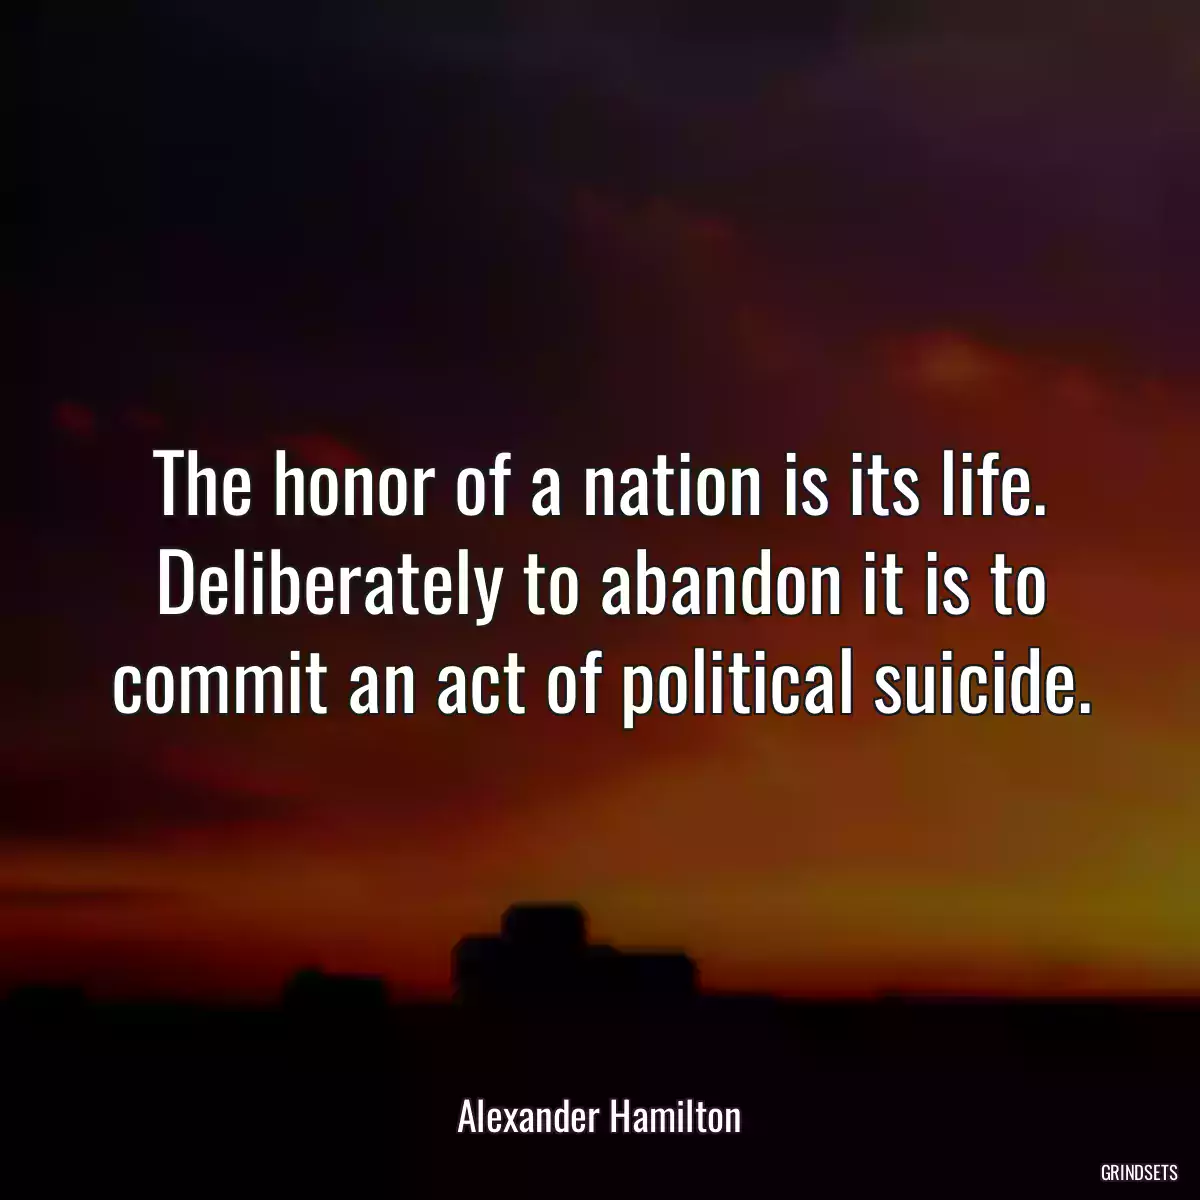 The honor of a nation is its life. Deliberately to abandon it is to commit an act of political suicide.